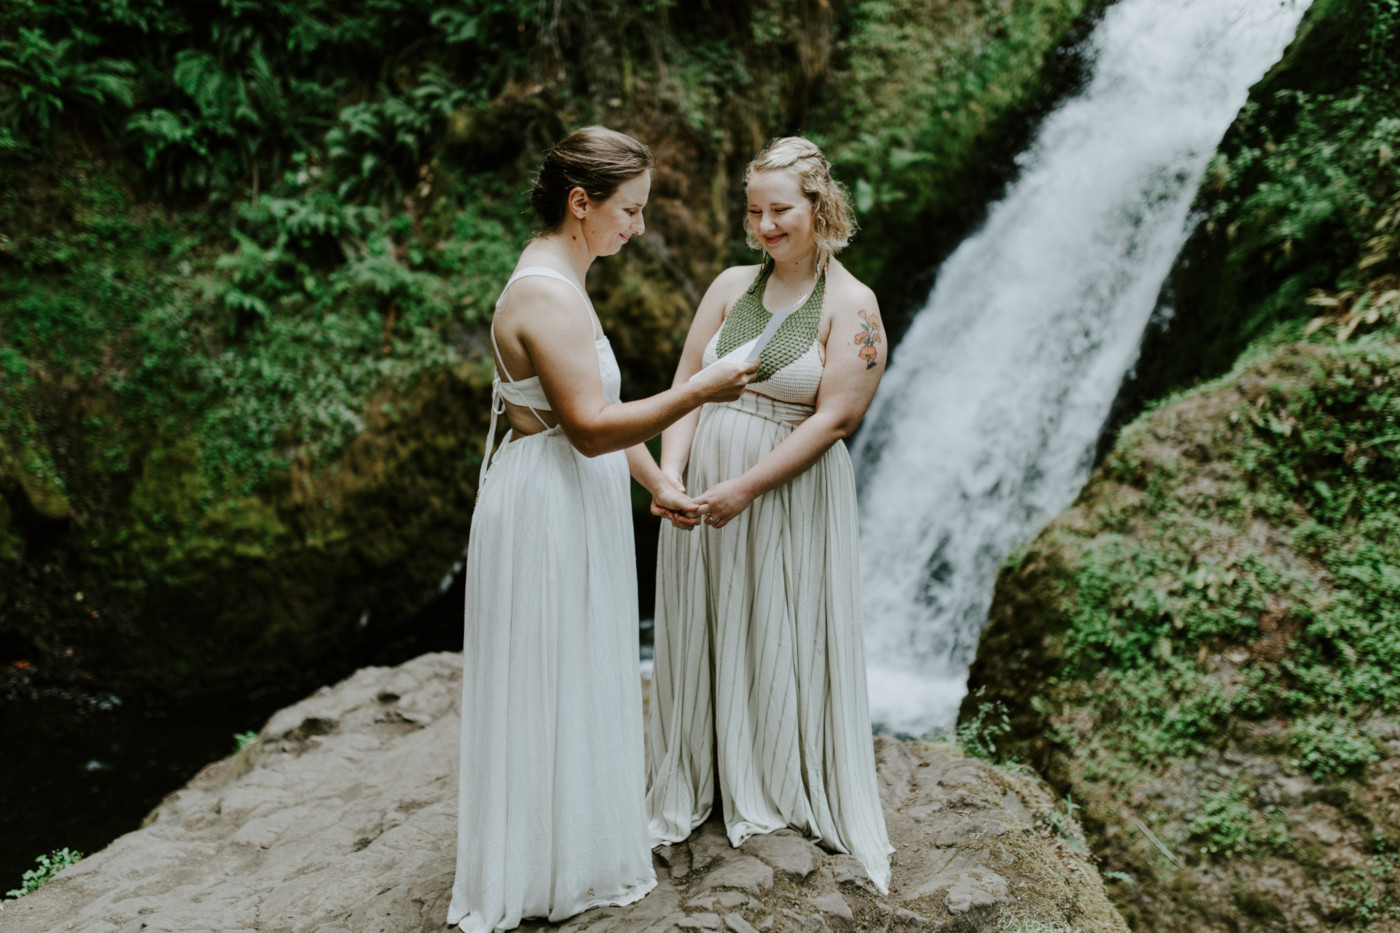 Kate and Audrey stand in front of the waterfall at Bridal Veil Falls. Elopement wedding photography at Bridal Veil Falls by Sienna Plus Josh.